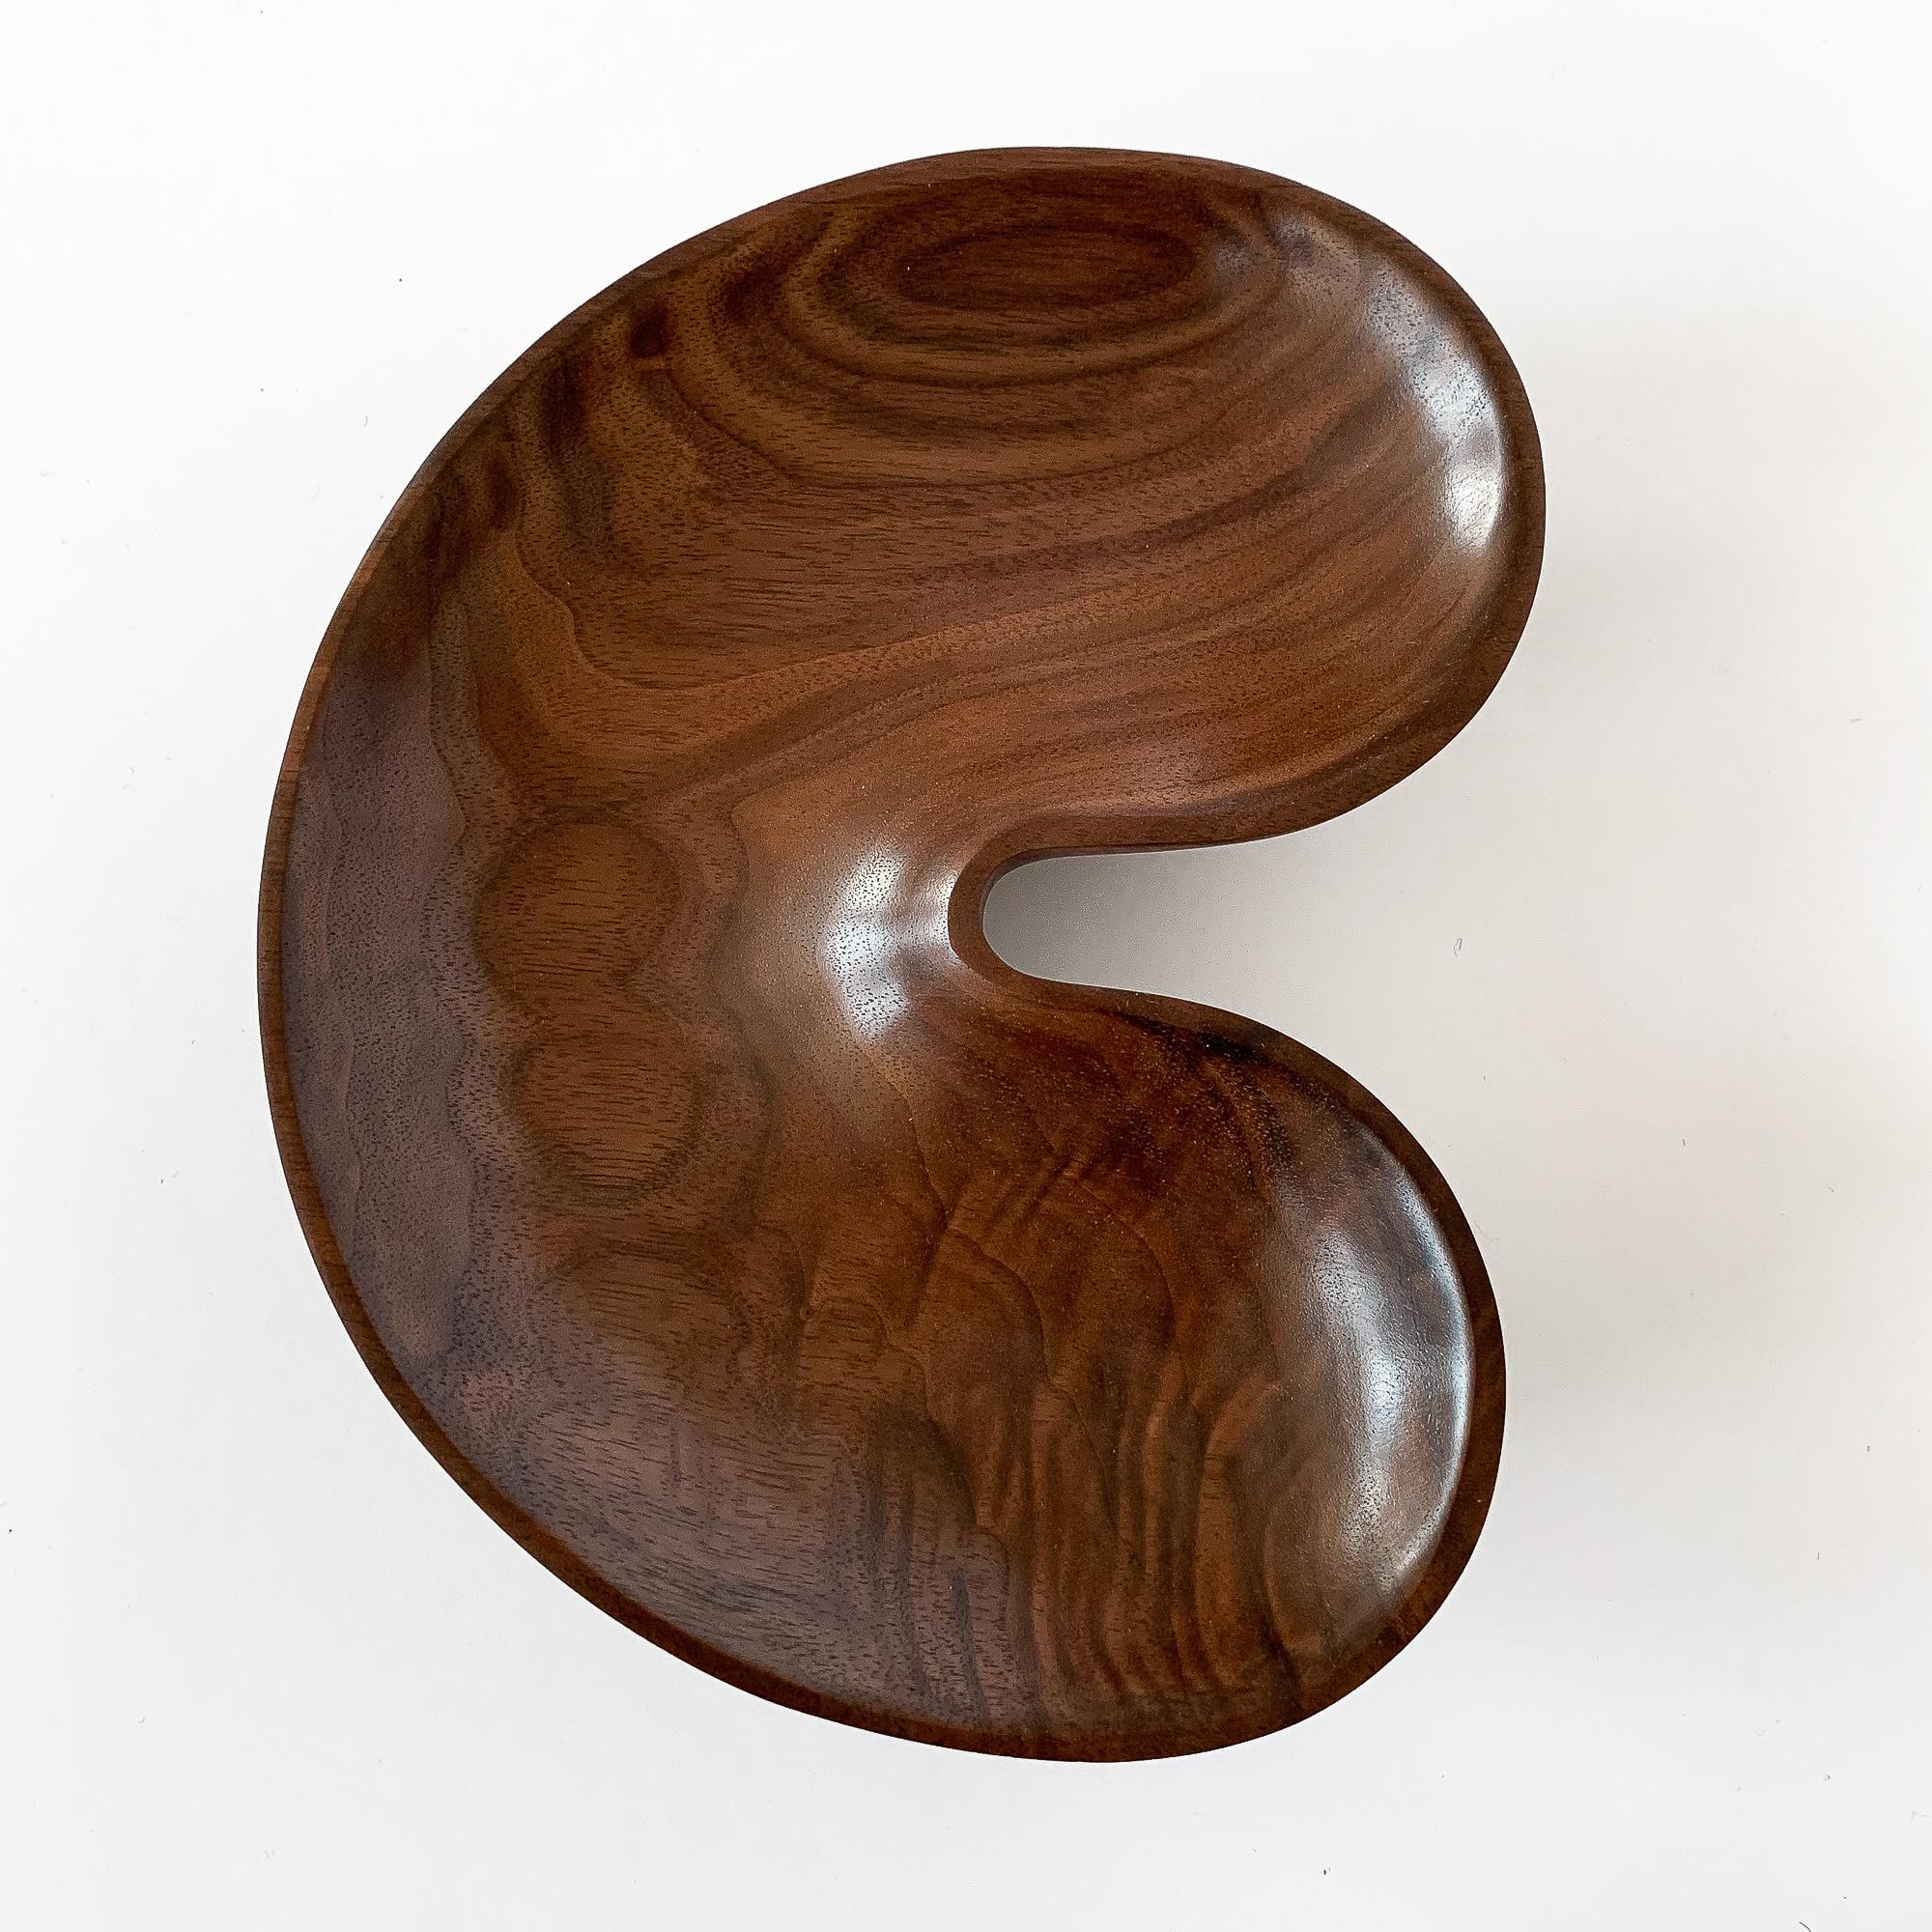 Small sculptural hand carved solid walnut bowl from the Native Tongue Collection by Foxwood Co. Foxwood Co. is the work of Casey Reed Johnson, a designer and sculptor whose work is inspired by function and driven by form. His current work explores